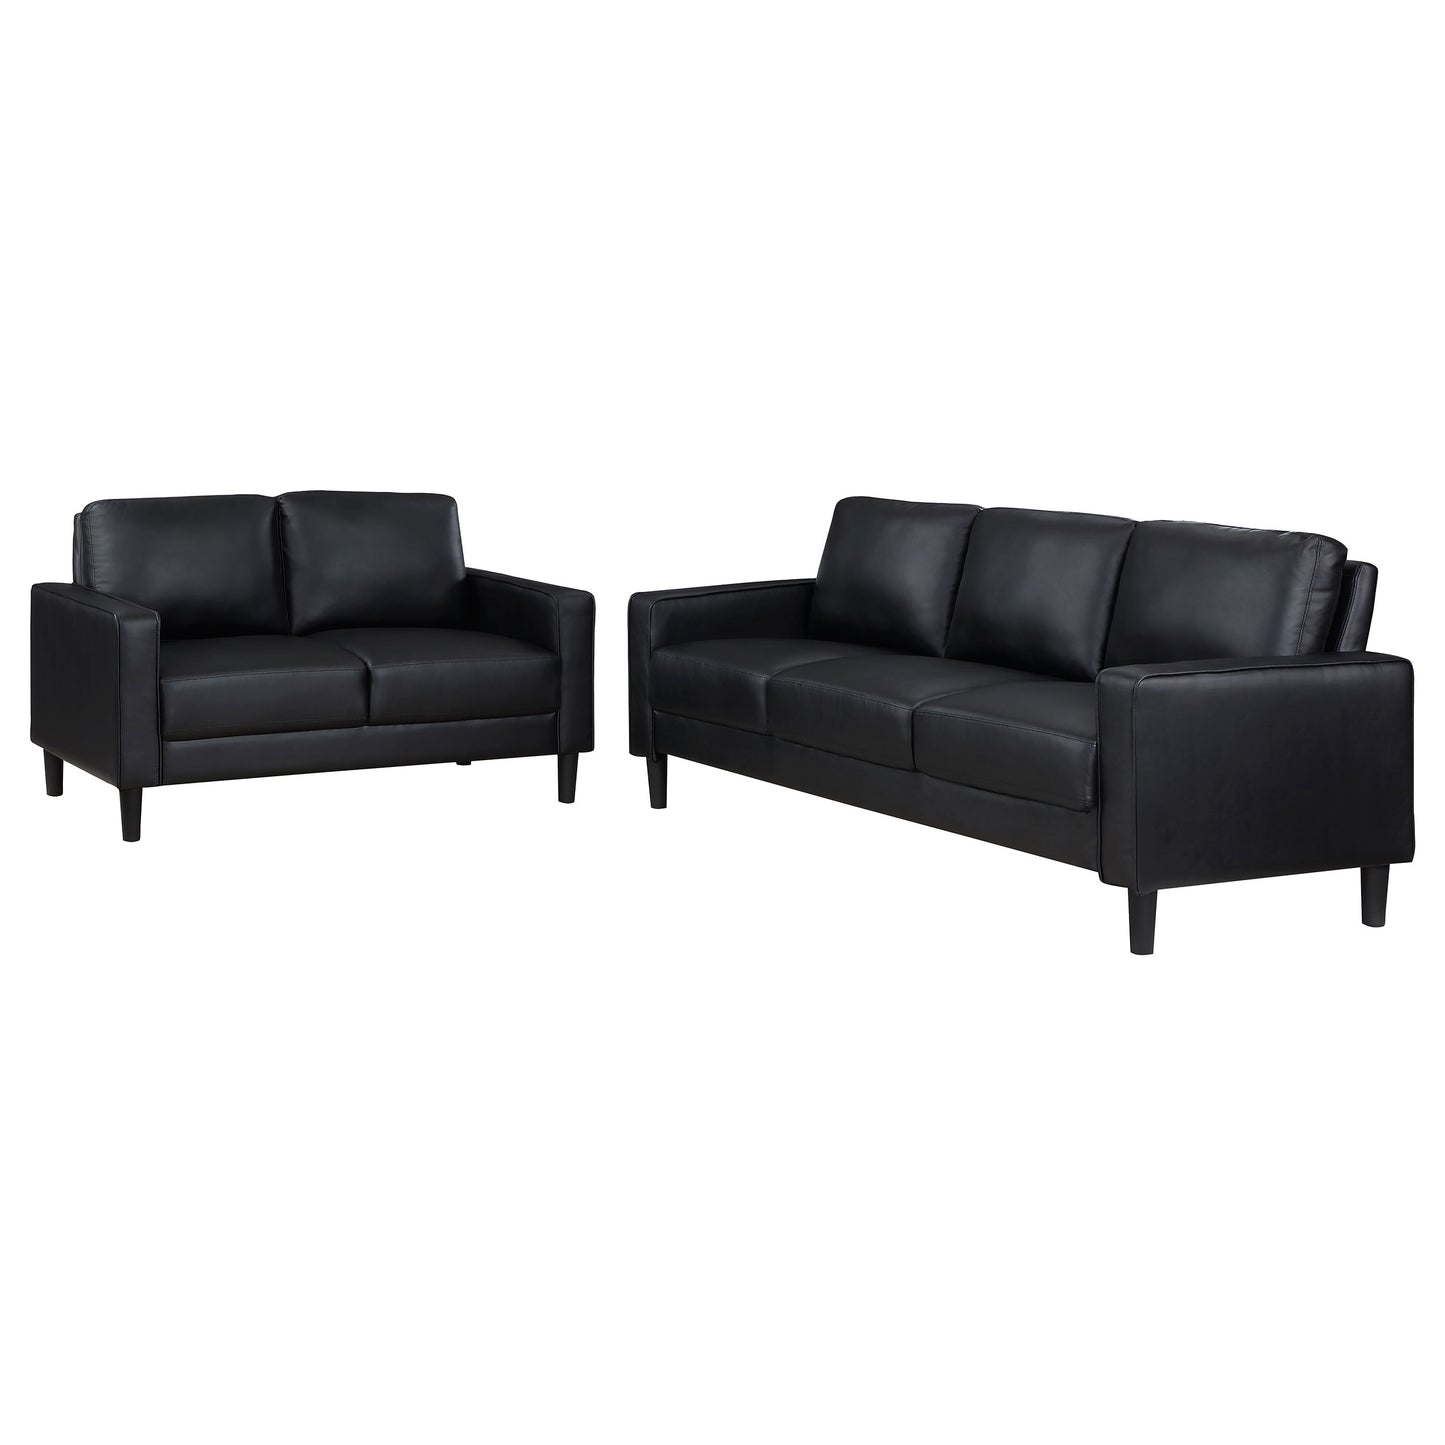 Ruth 2-piece Upholstered Track Arm Faux Leather Sofa Set Black